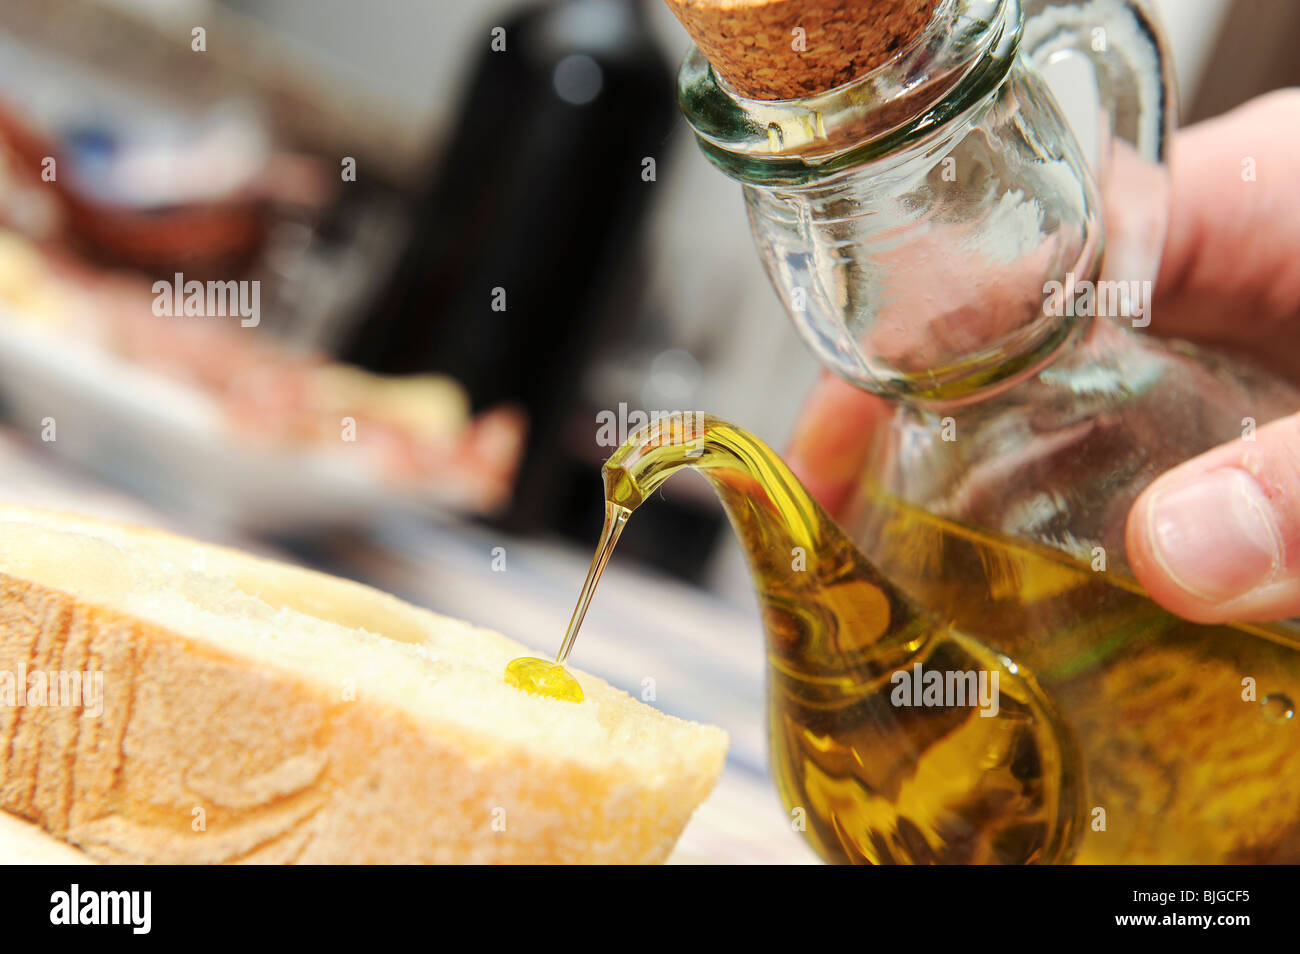 pouring olive oil on a bread slice Stock Photo